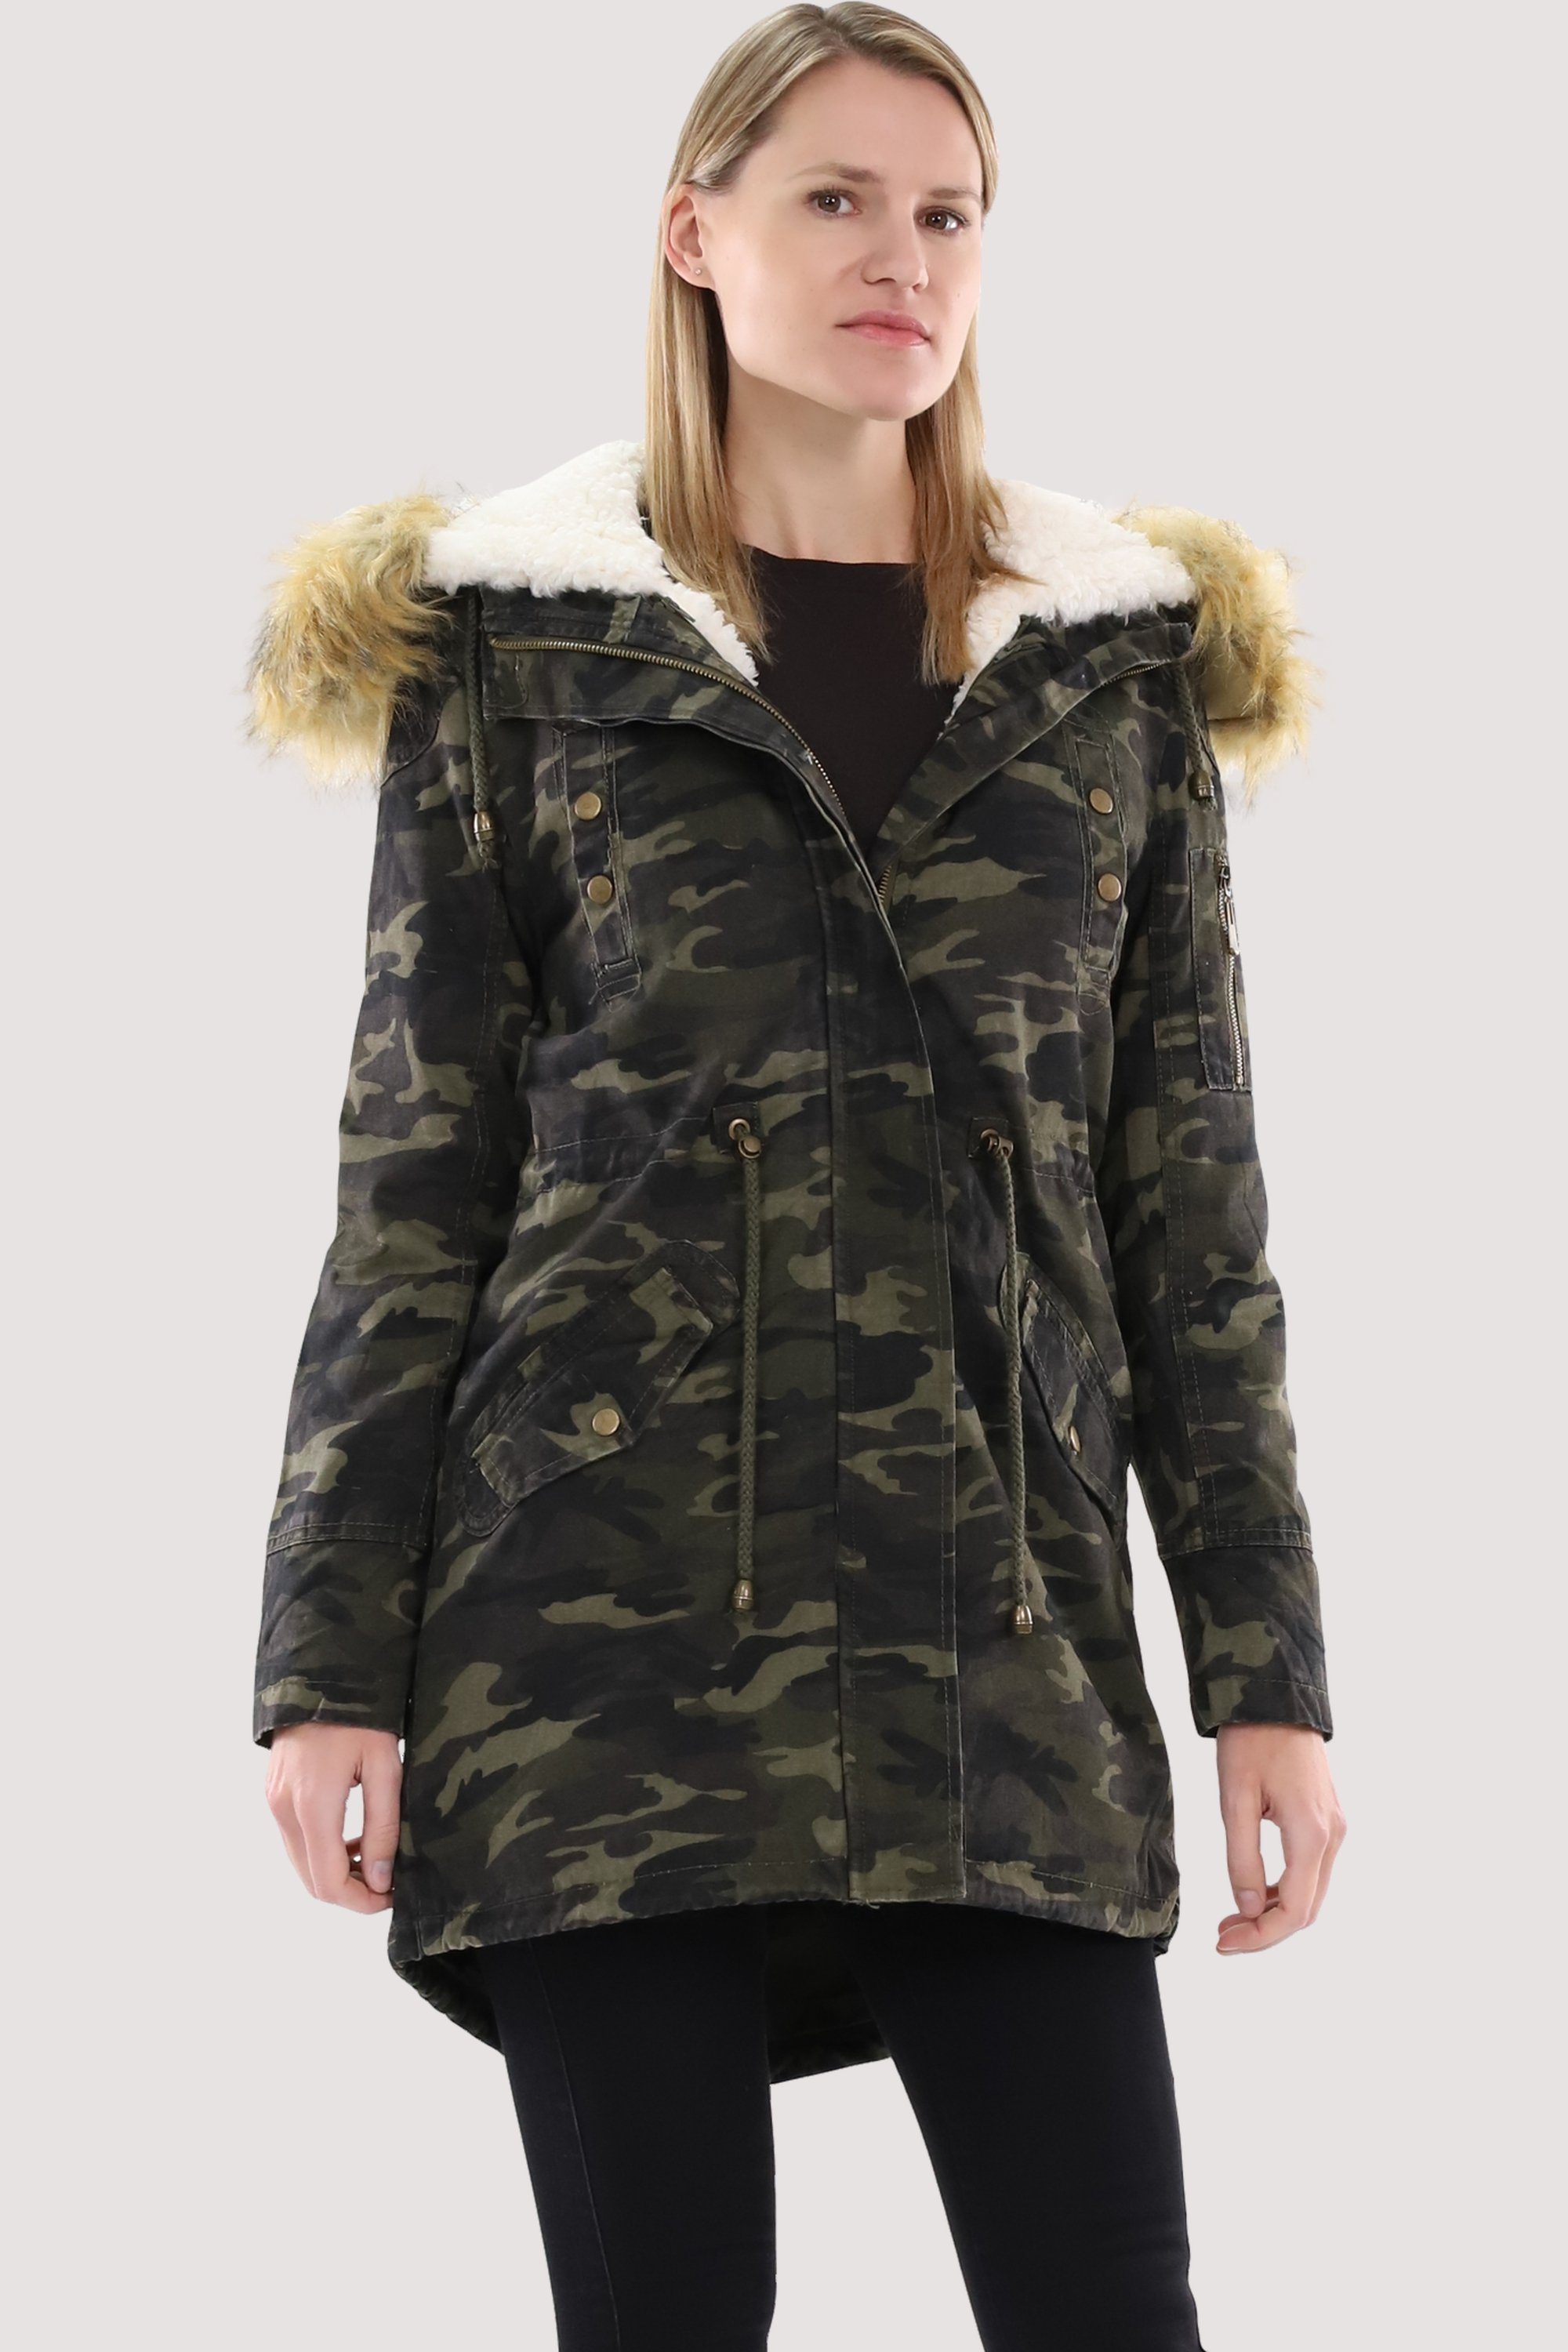 malito more than fashion Parka 81109 Winterjacke in Camouflage Military-Look mit Teddyfell military-81109